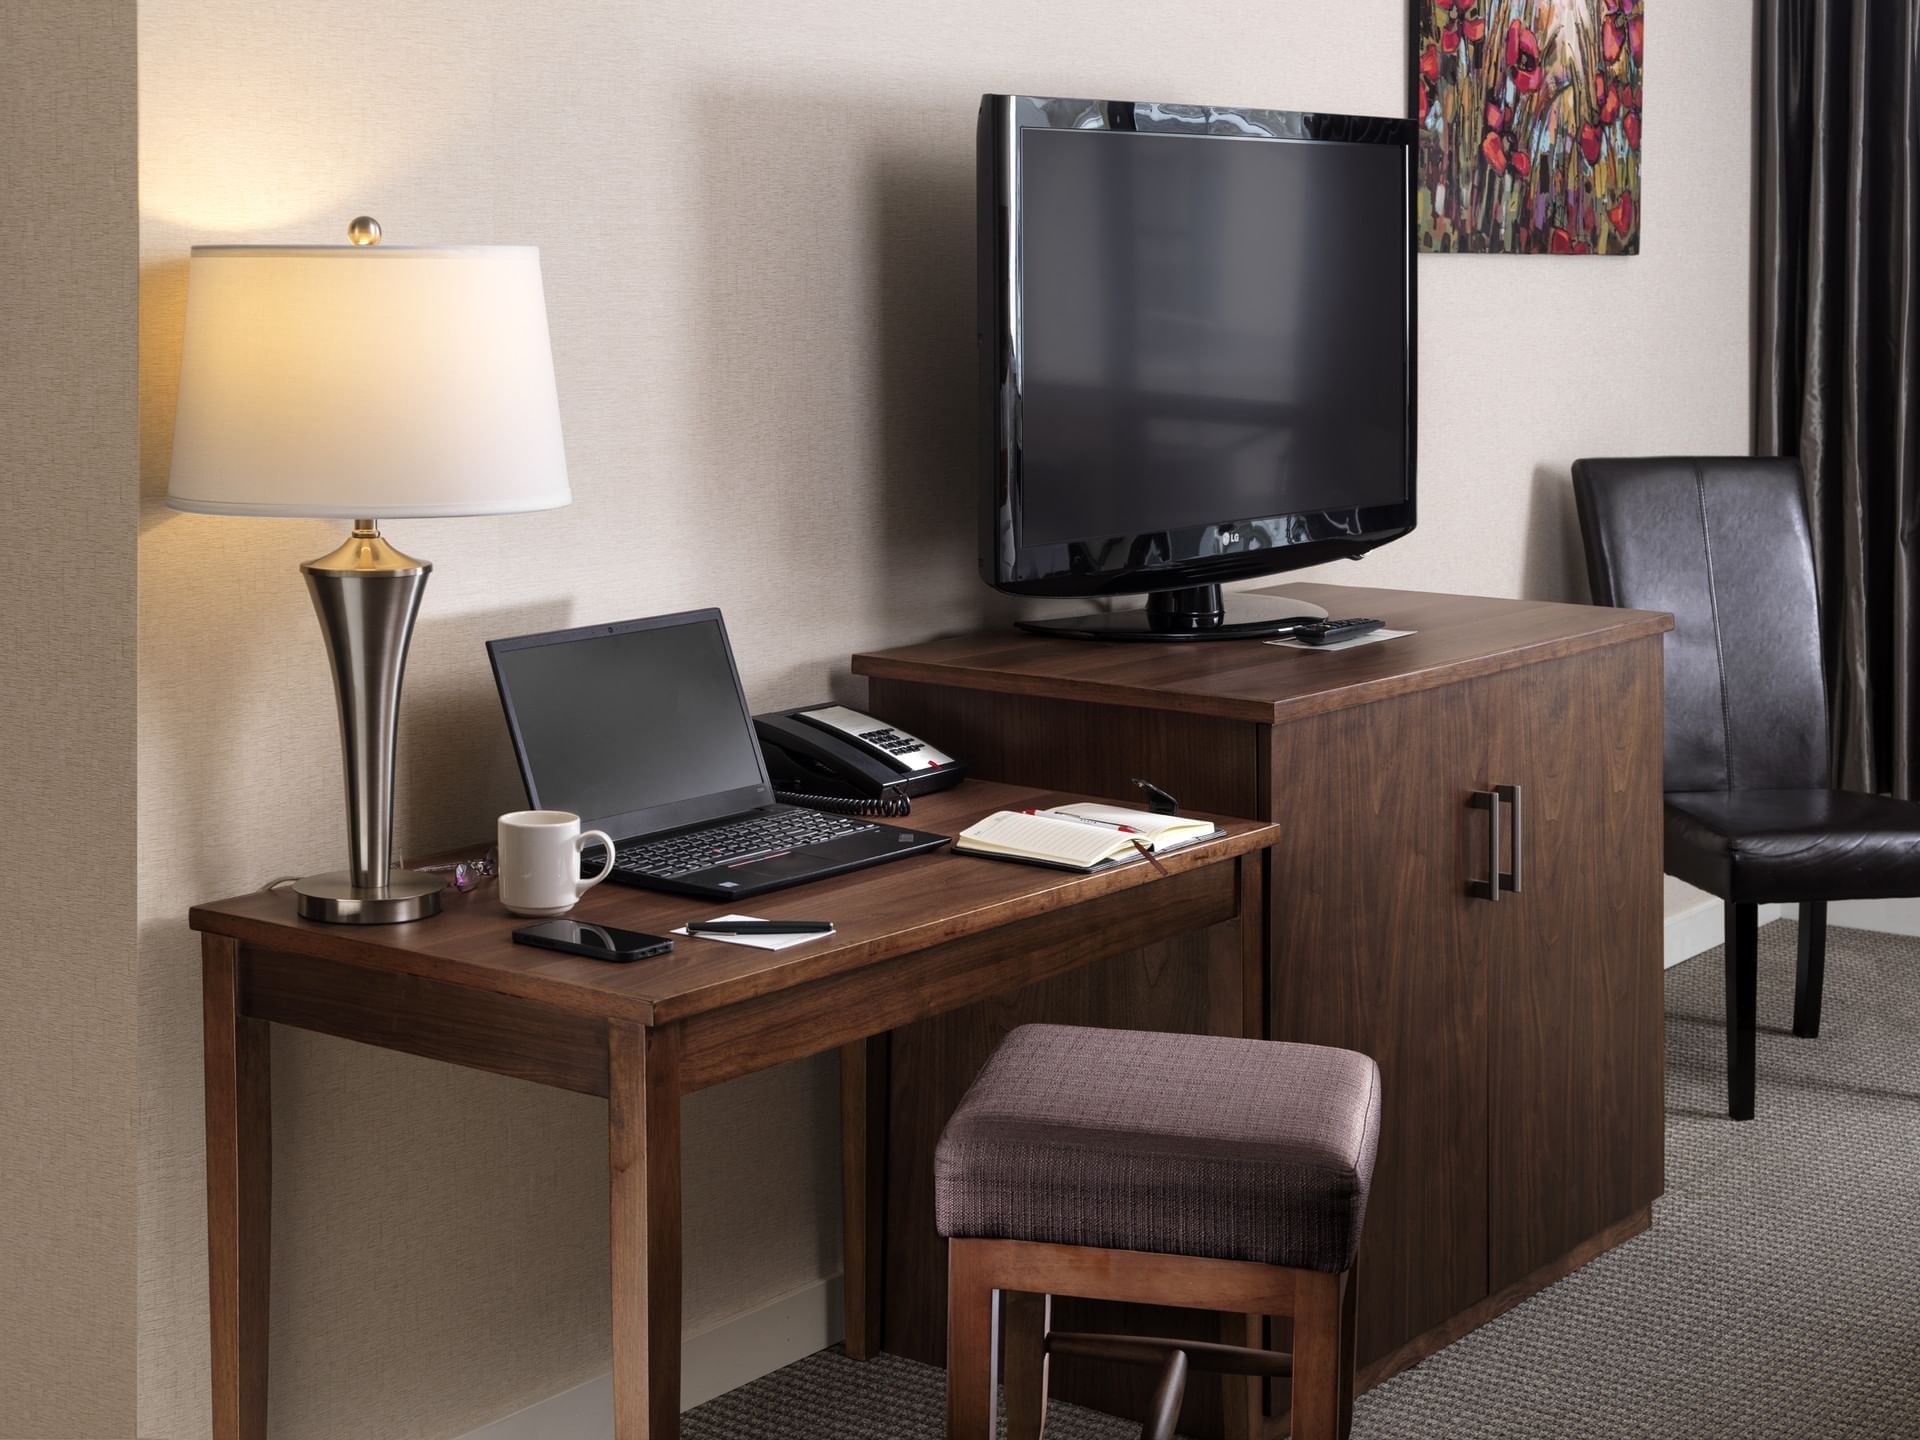 TV stand by a desk with items in a Room at Huntingdon Manor